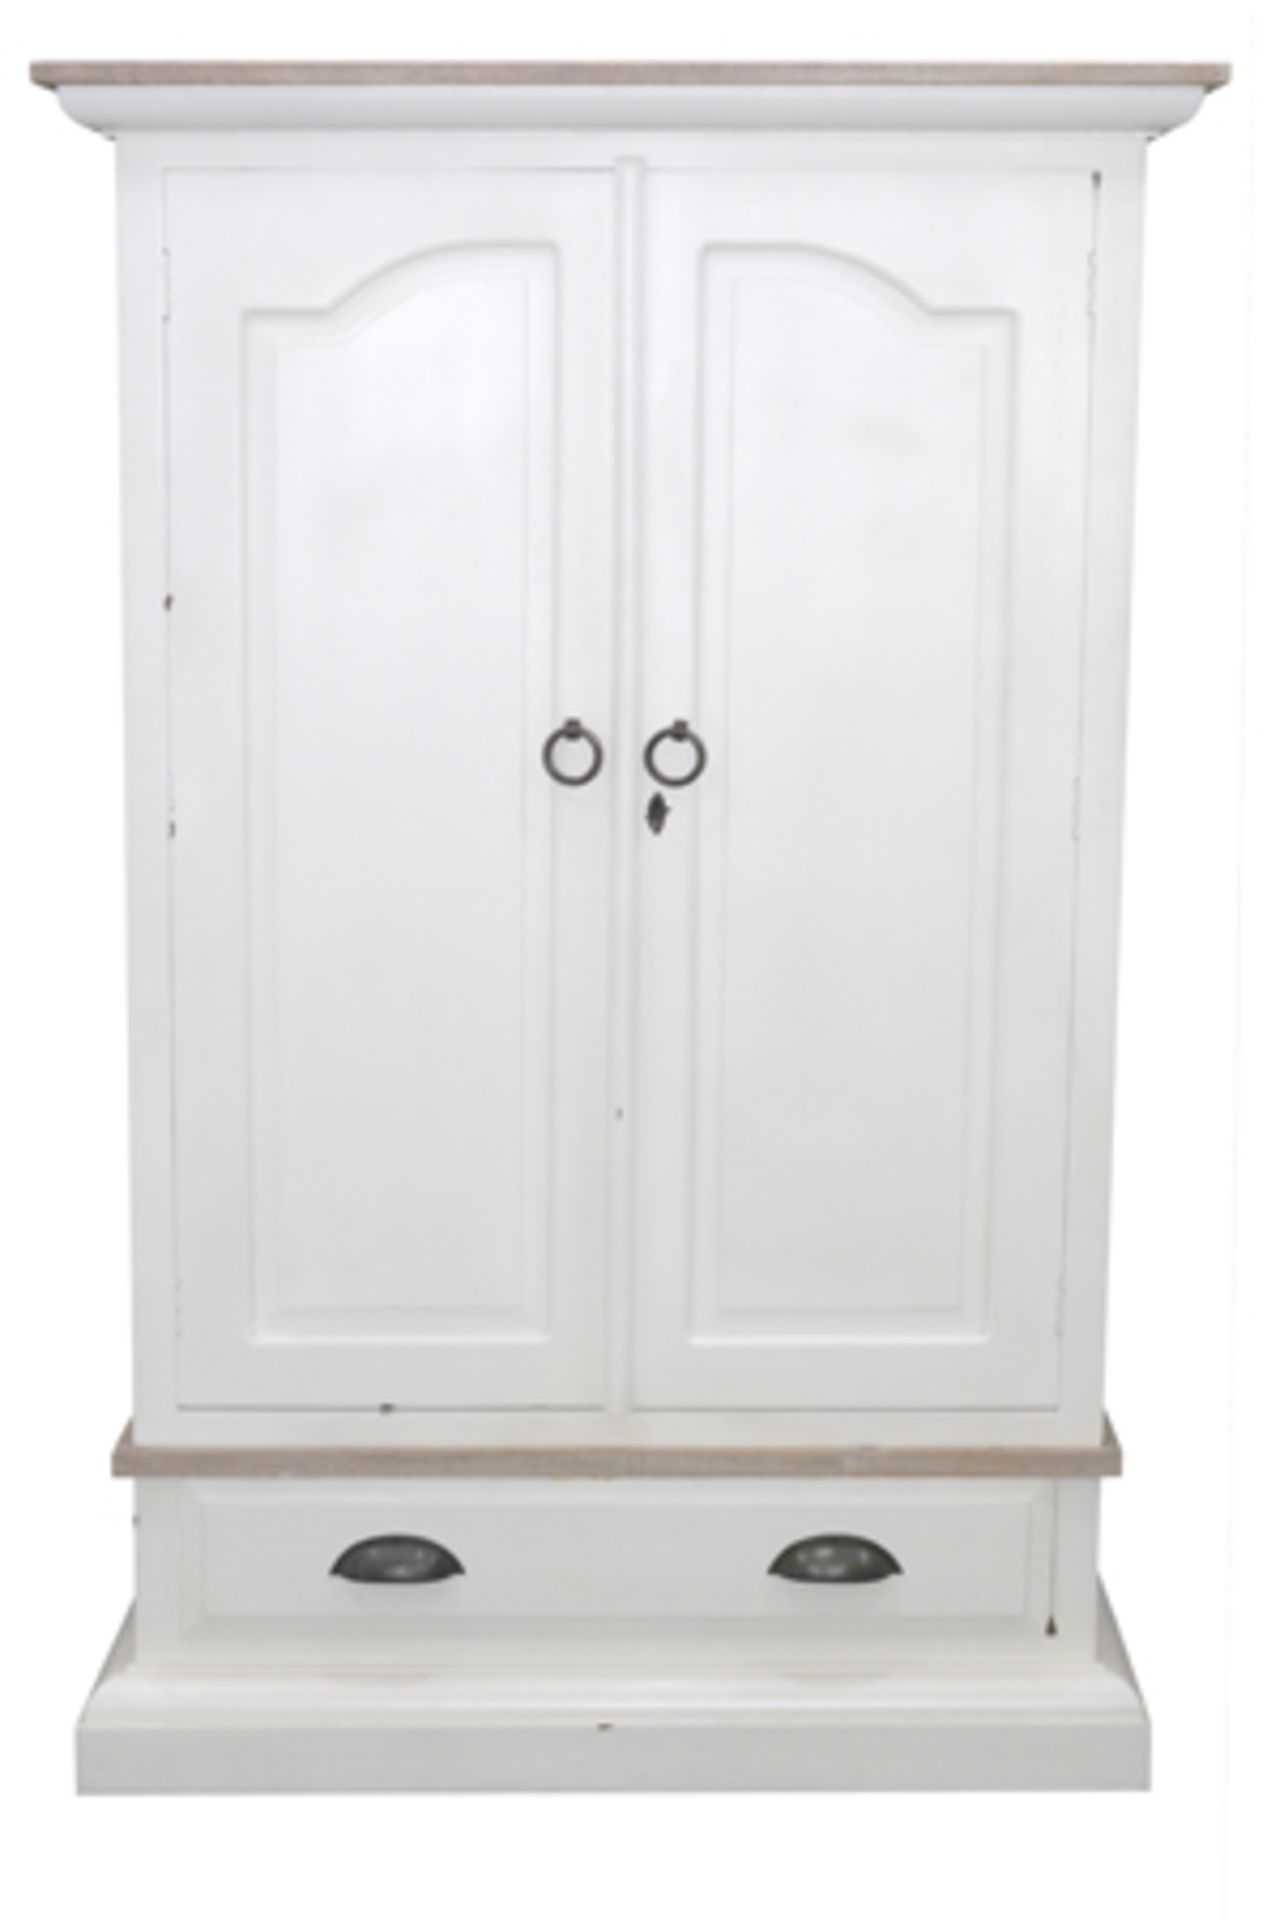 Cottonwood Wardrobe 2 Door Antique White The Cottonwood Finish Adds A Fresh And Tranquil Appeal To